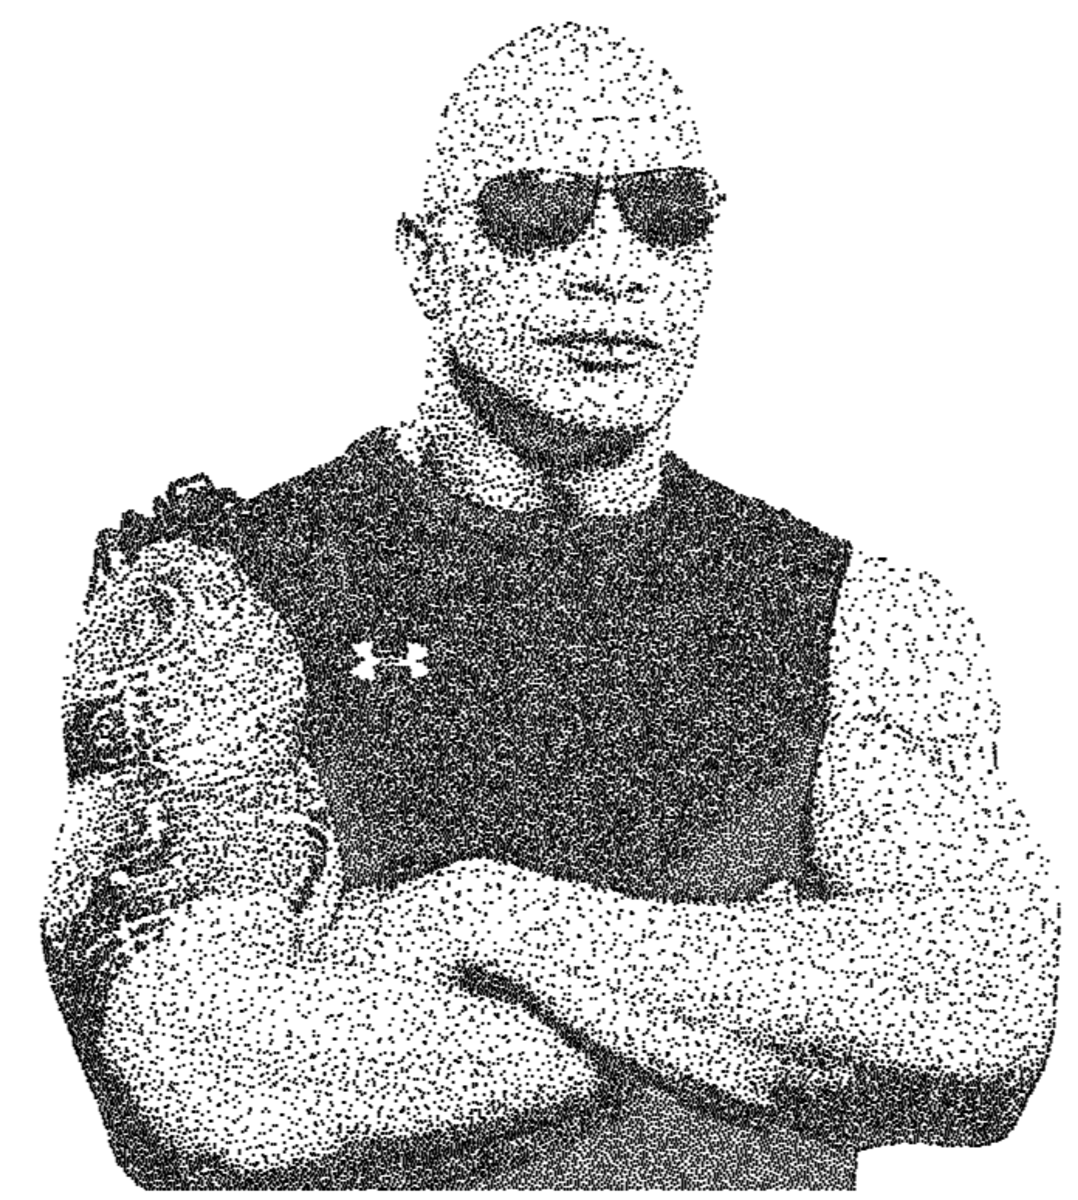 Converted a photo of Dwayne Johnson to stippling art.